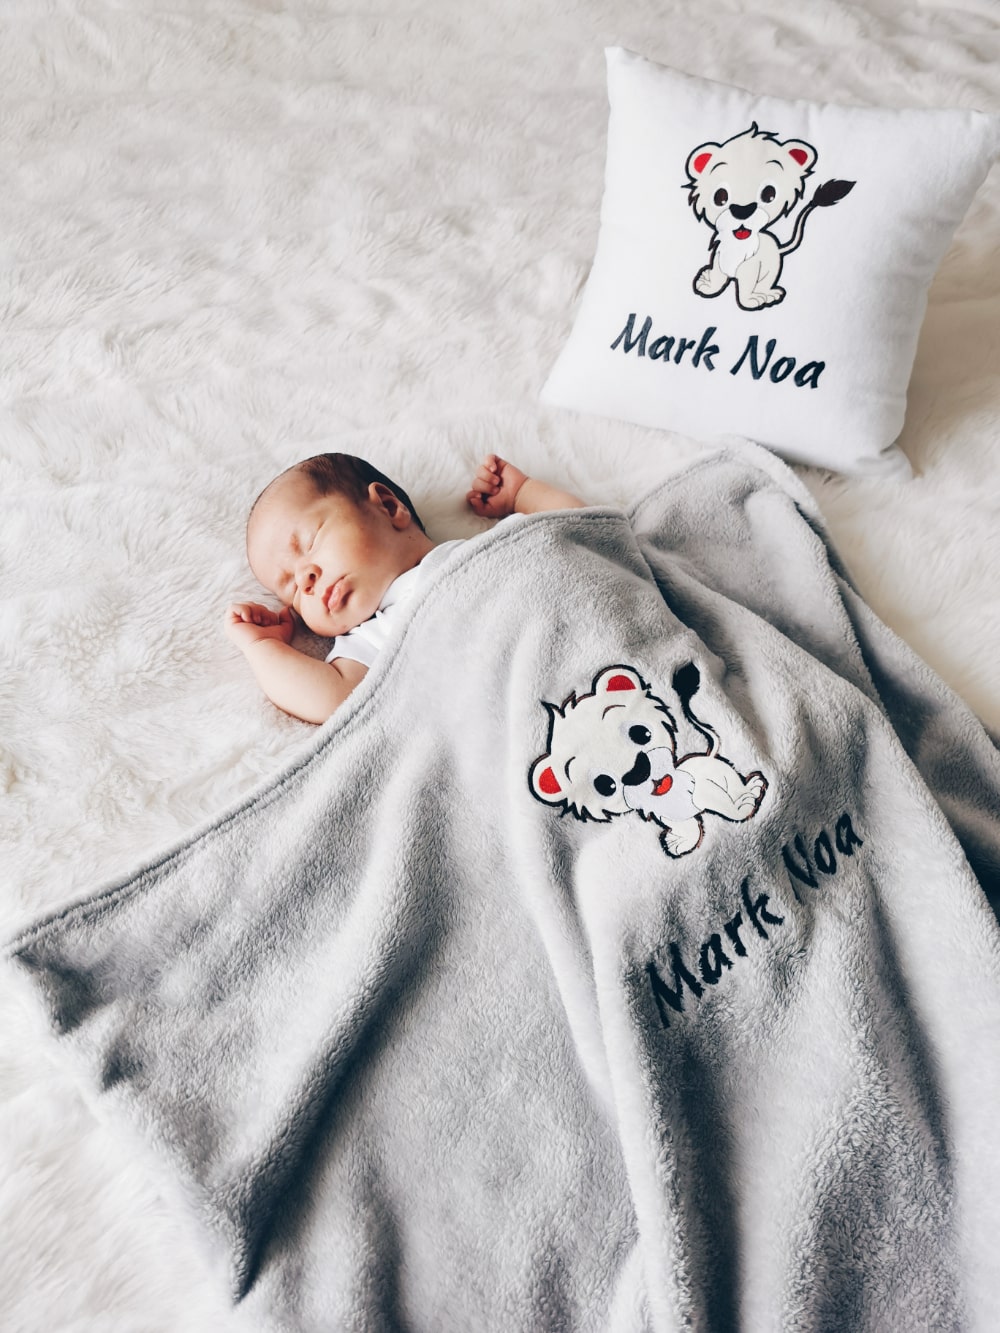 Adorable baby boy rests peacefully on his bed, snuggled up with a soft and cozy personalized pillow and blanket, customized with his name and a charming design.